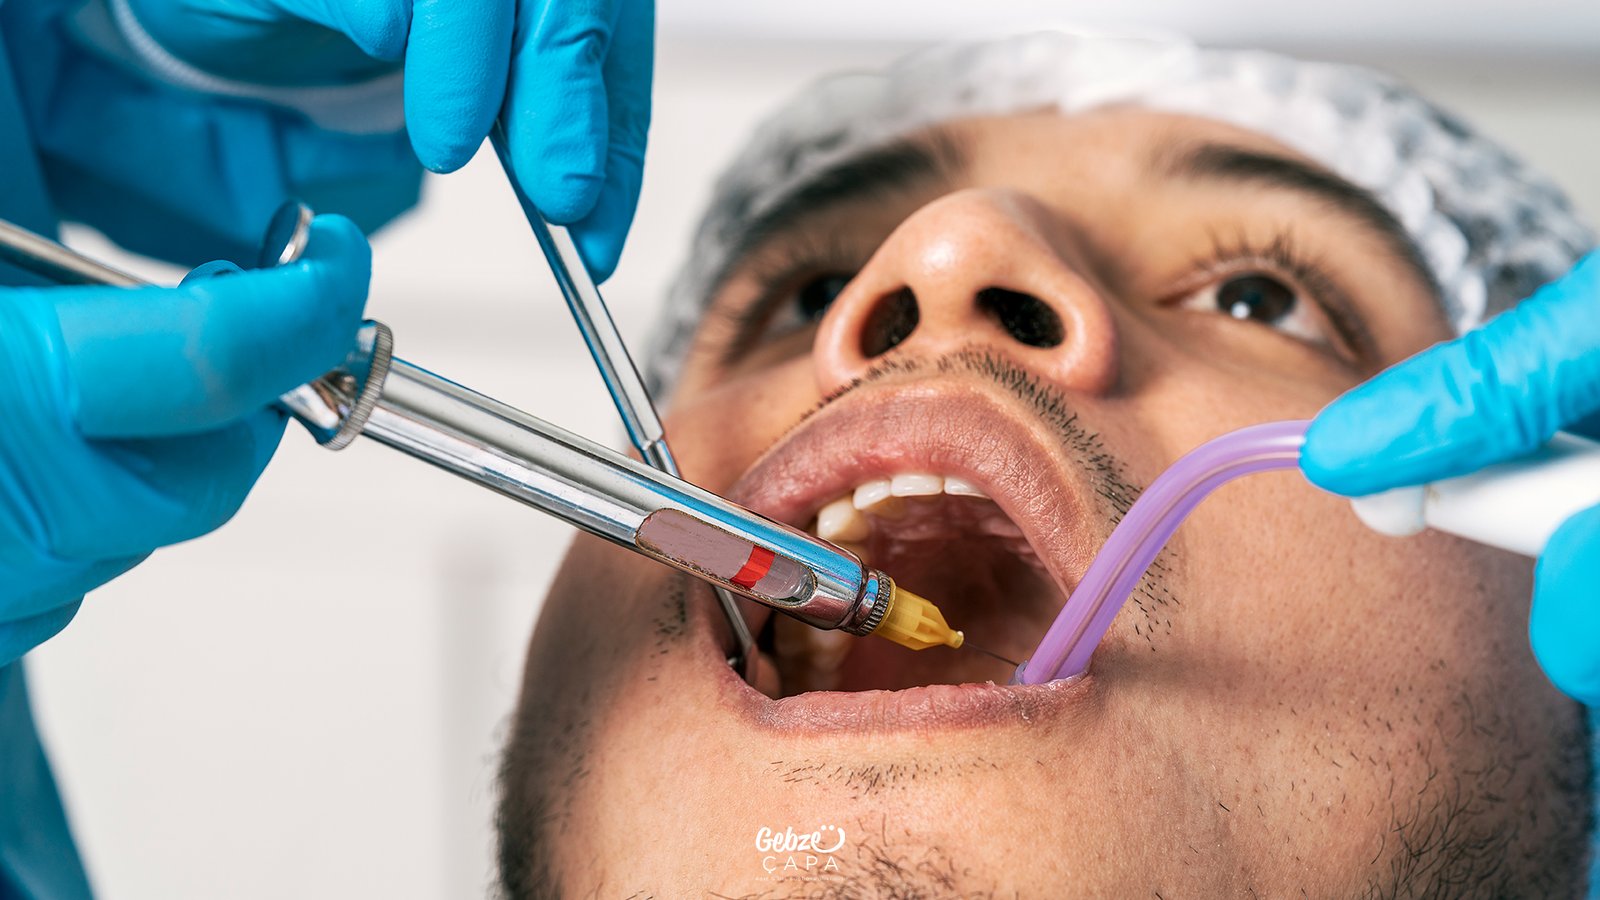 How Long Does a Dental Root Canal Treatment Take?